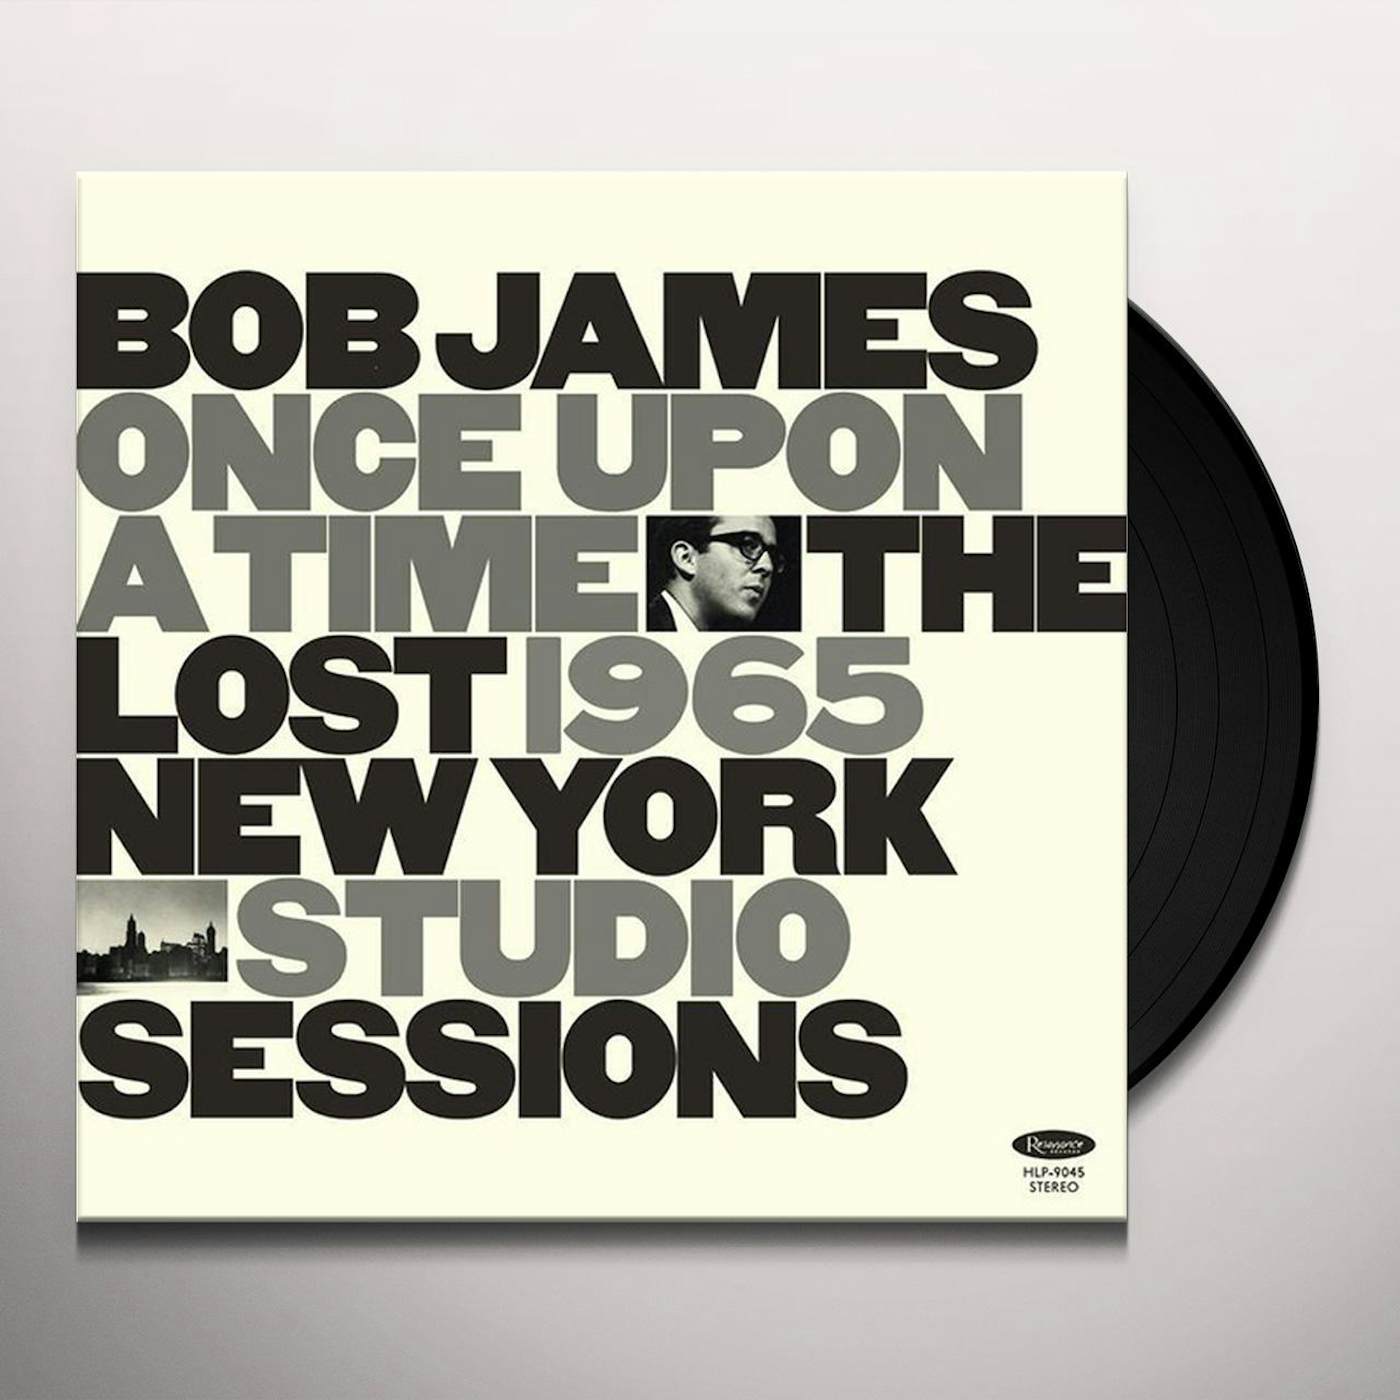 Bob James Once Upon A Time: The Lost 1965 New York Studio Sessions Vinyl Record